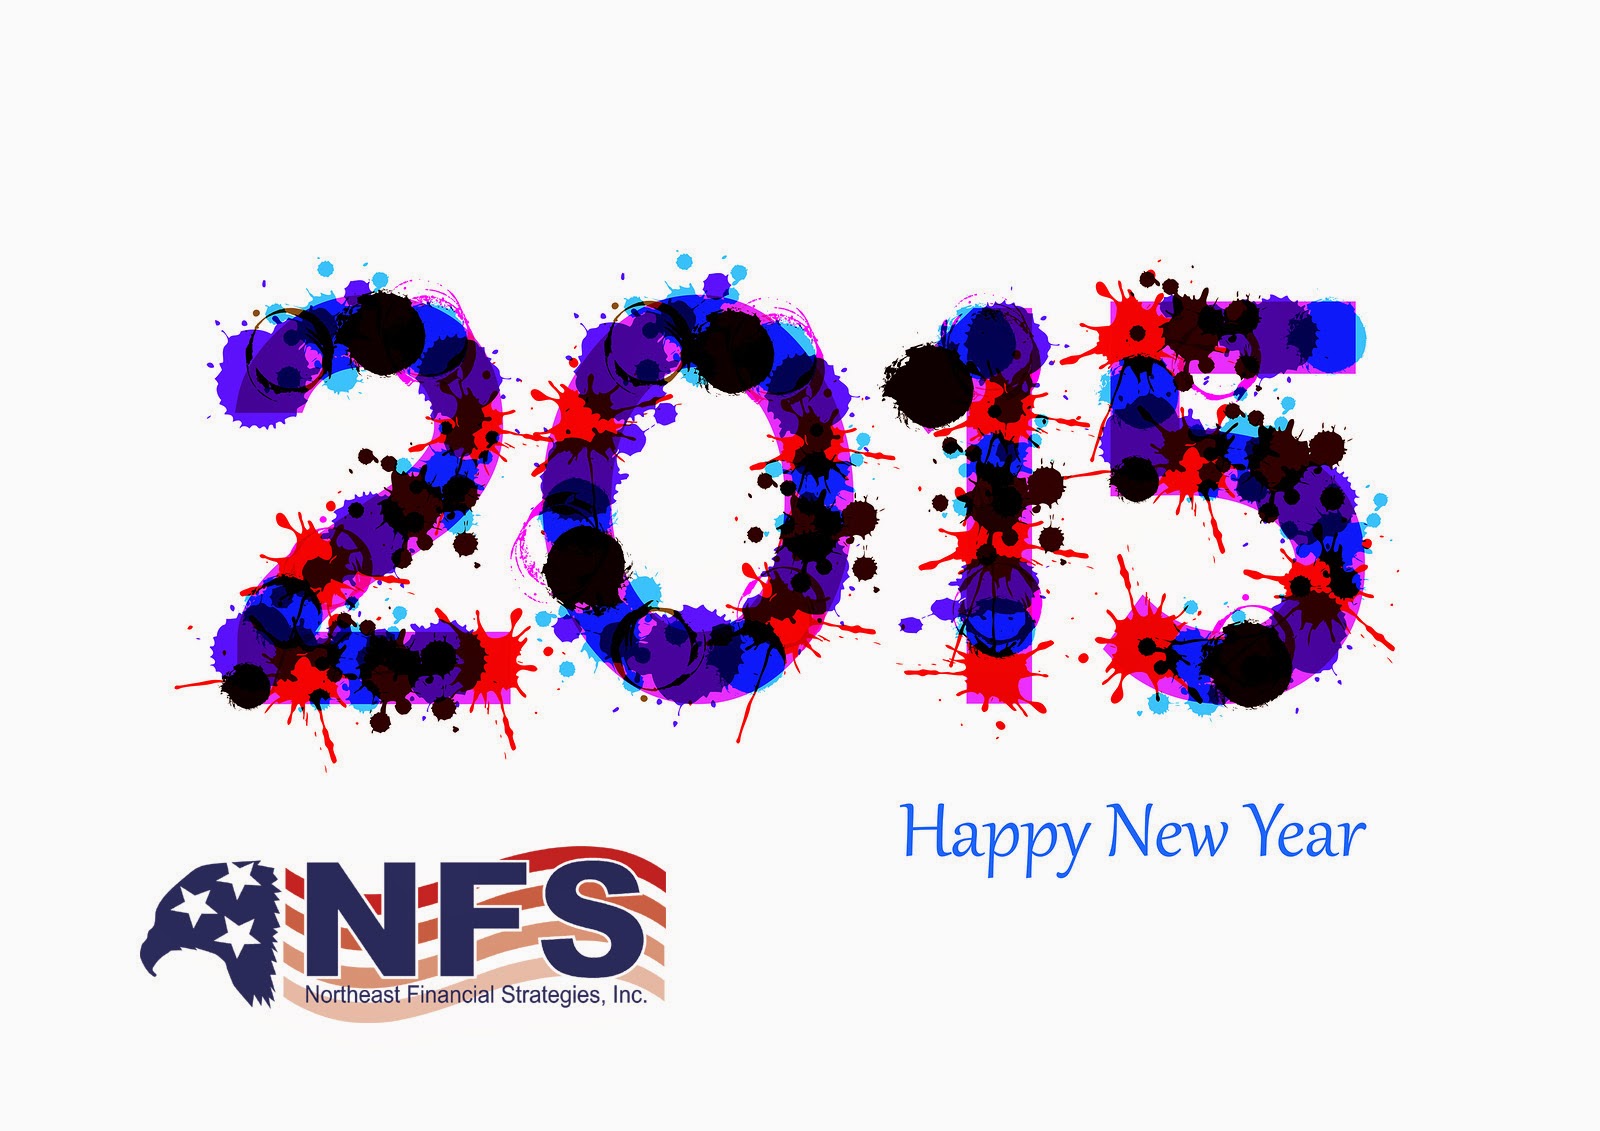 Happy New Year from NFS | Northeast Financial Strategies, Inc.